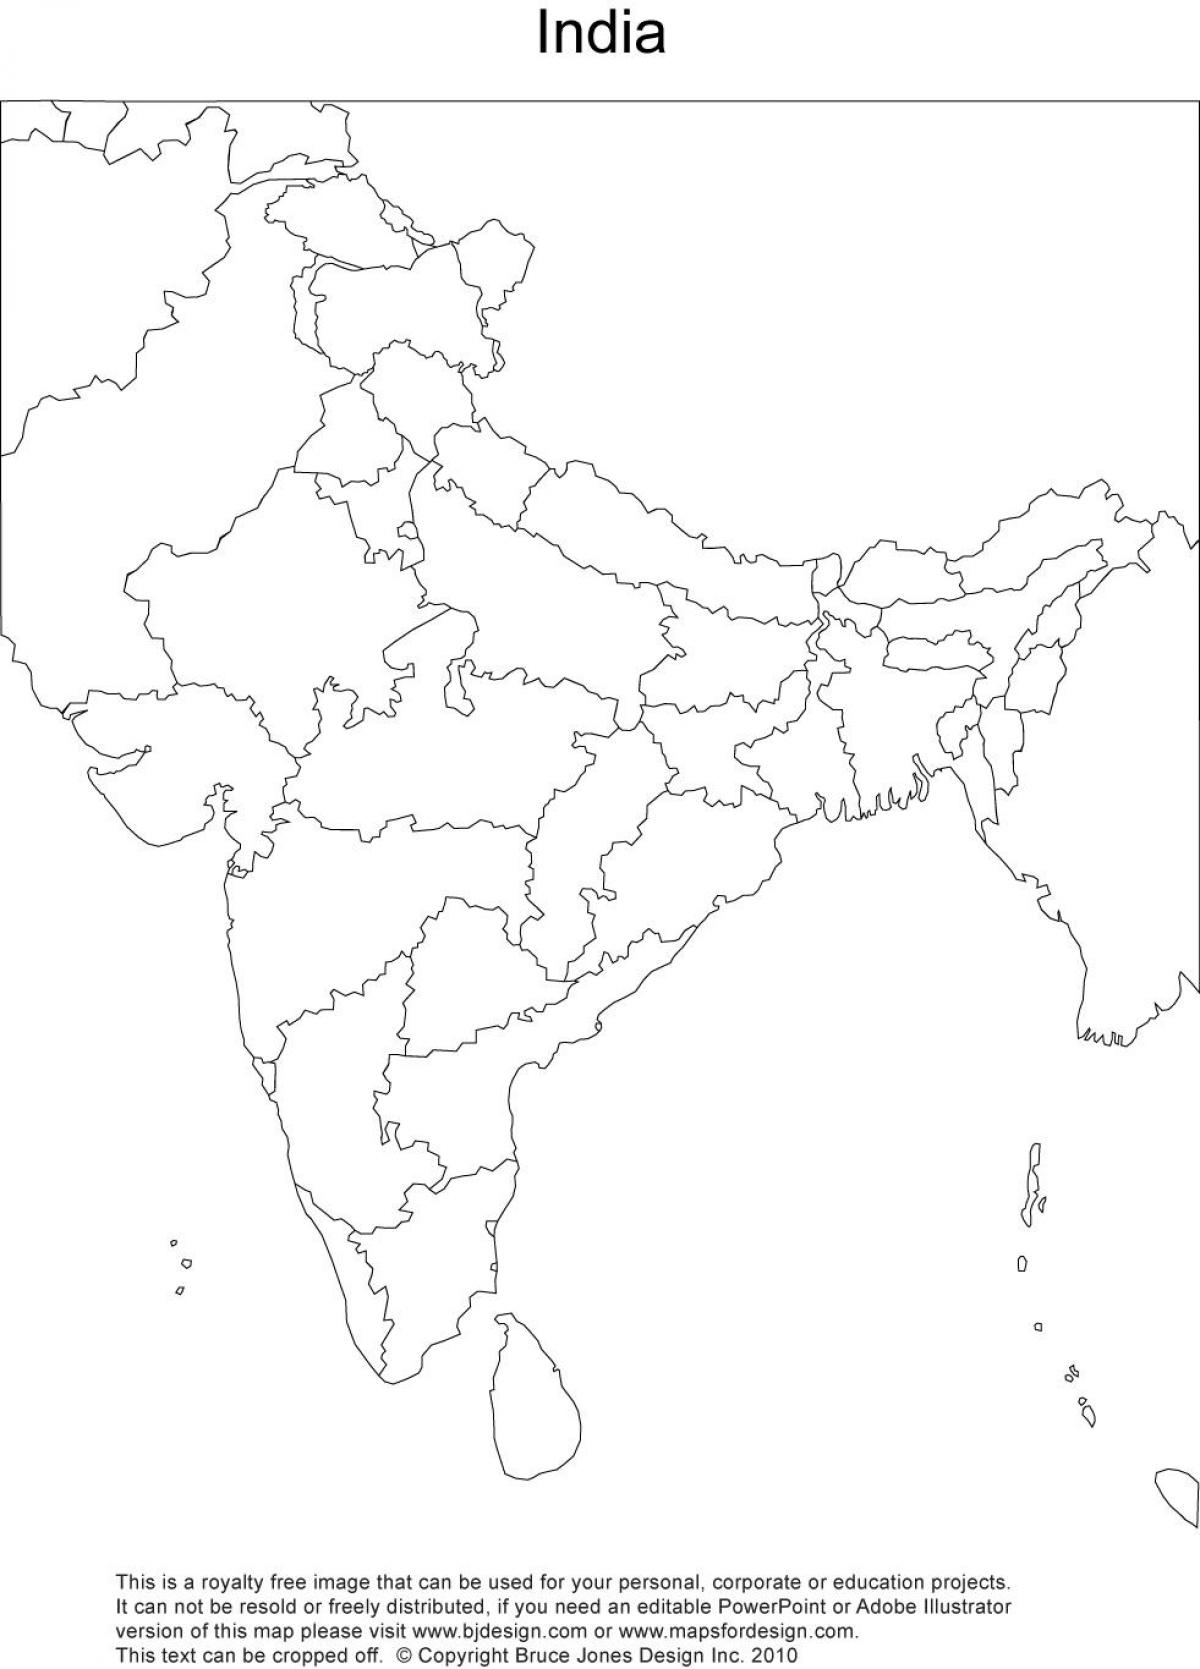 India Physical Map Blank Outline Blank Outline Physical Map Of India Southern Asia Asia